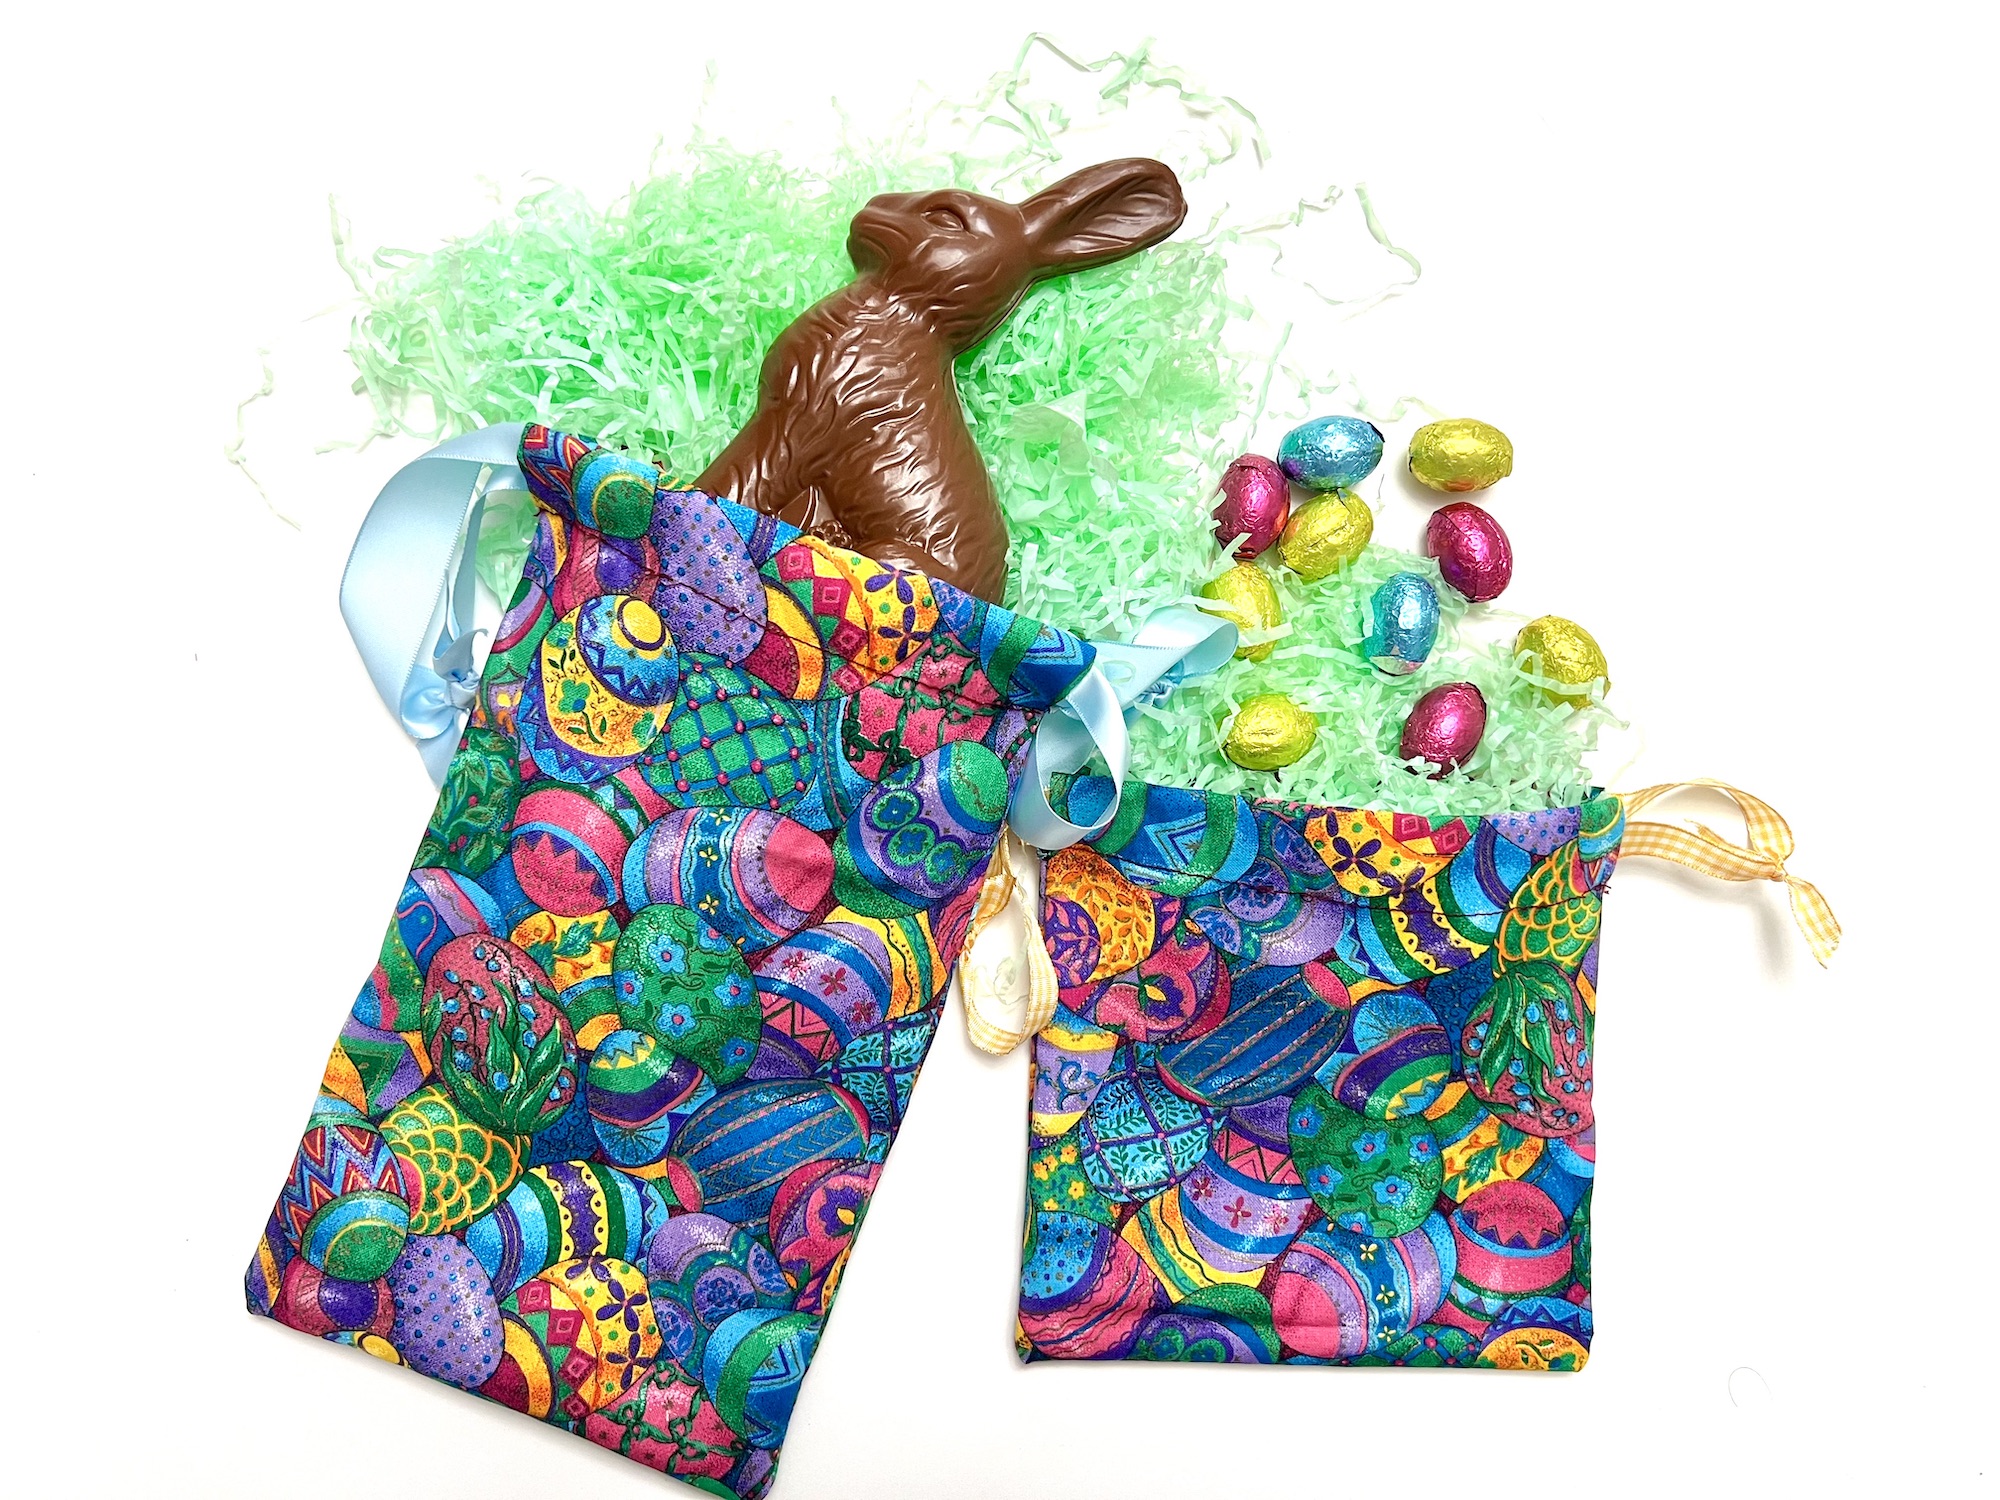 Two colorful Easter-themed crayon bags with patterned eggs, filled with green decorative shreds, assorted chocolate eggs, and a chocolate bunny.